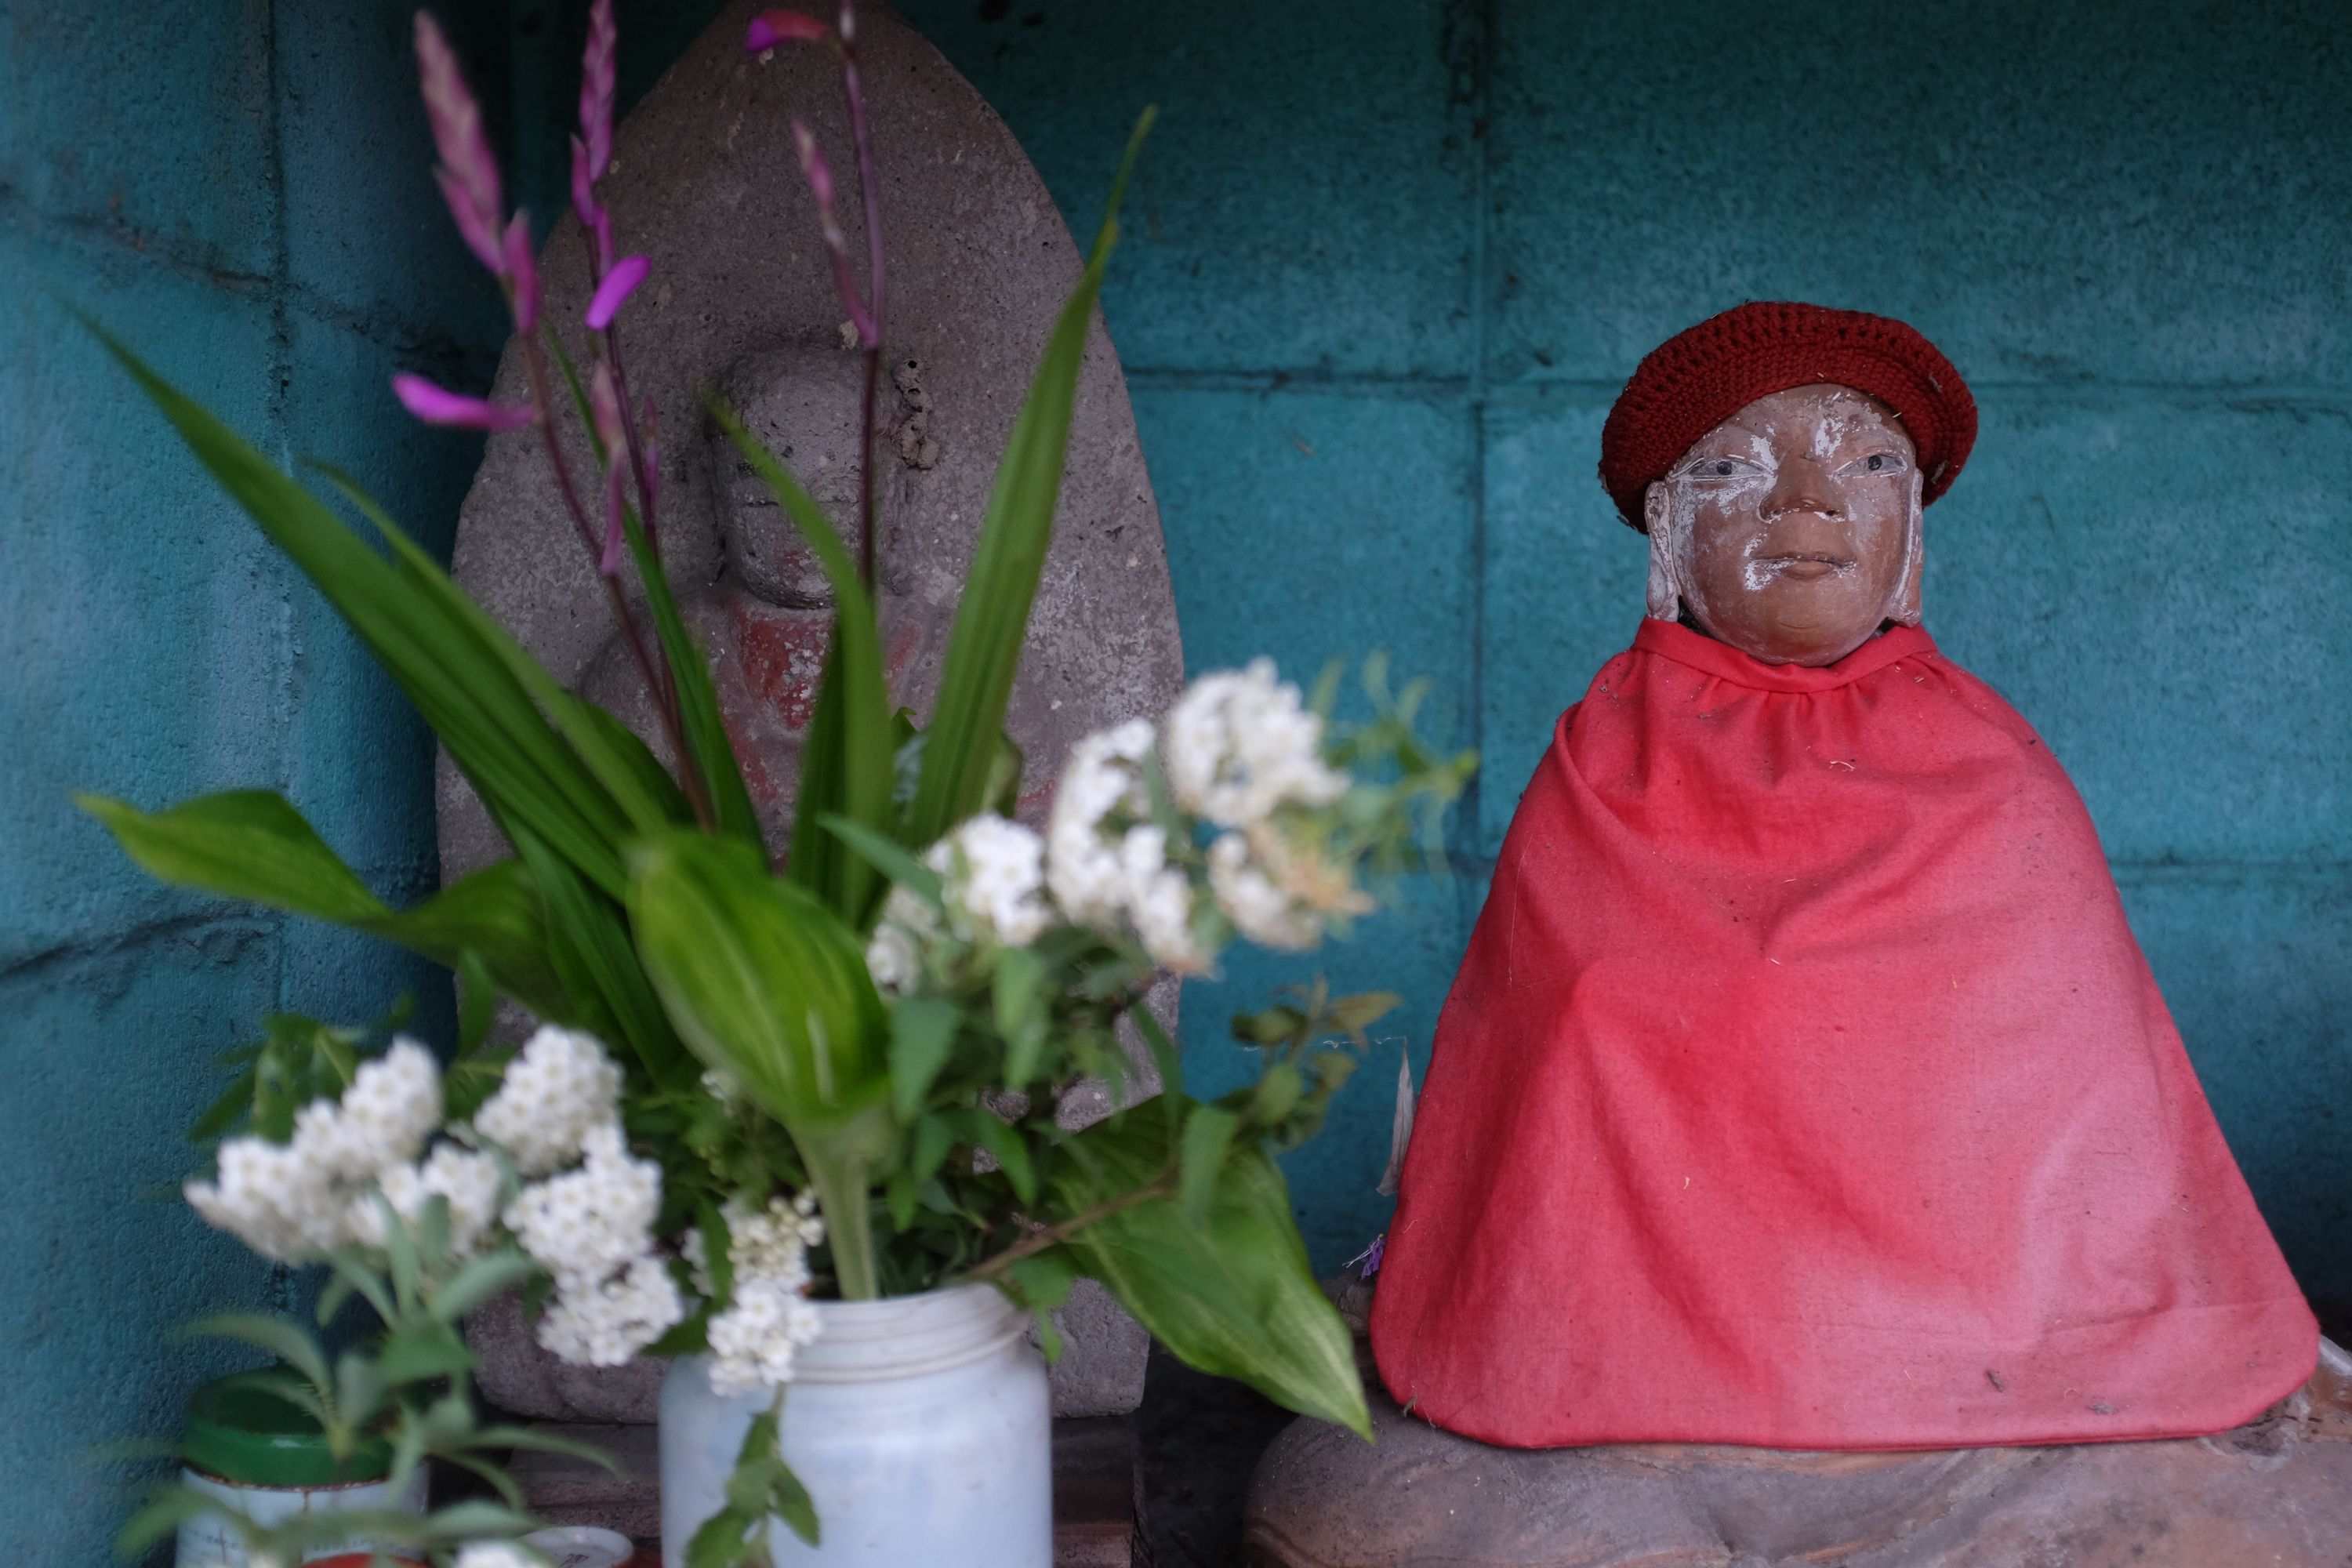 Two Buddhist statues, one dressed in red, on a small altar, with a vase of flowers.